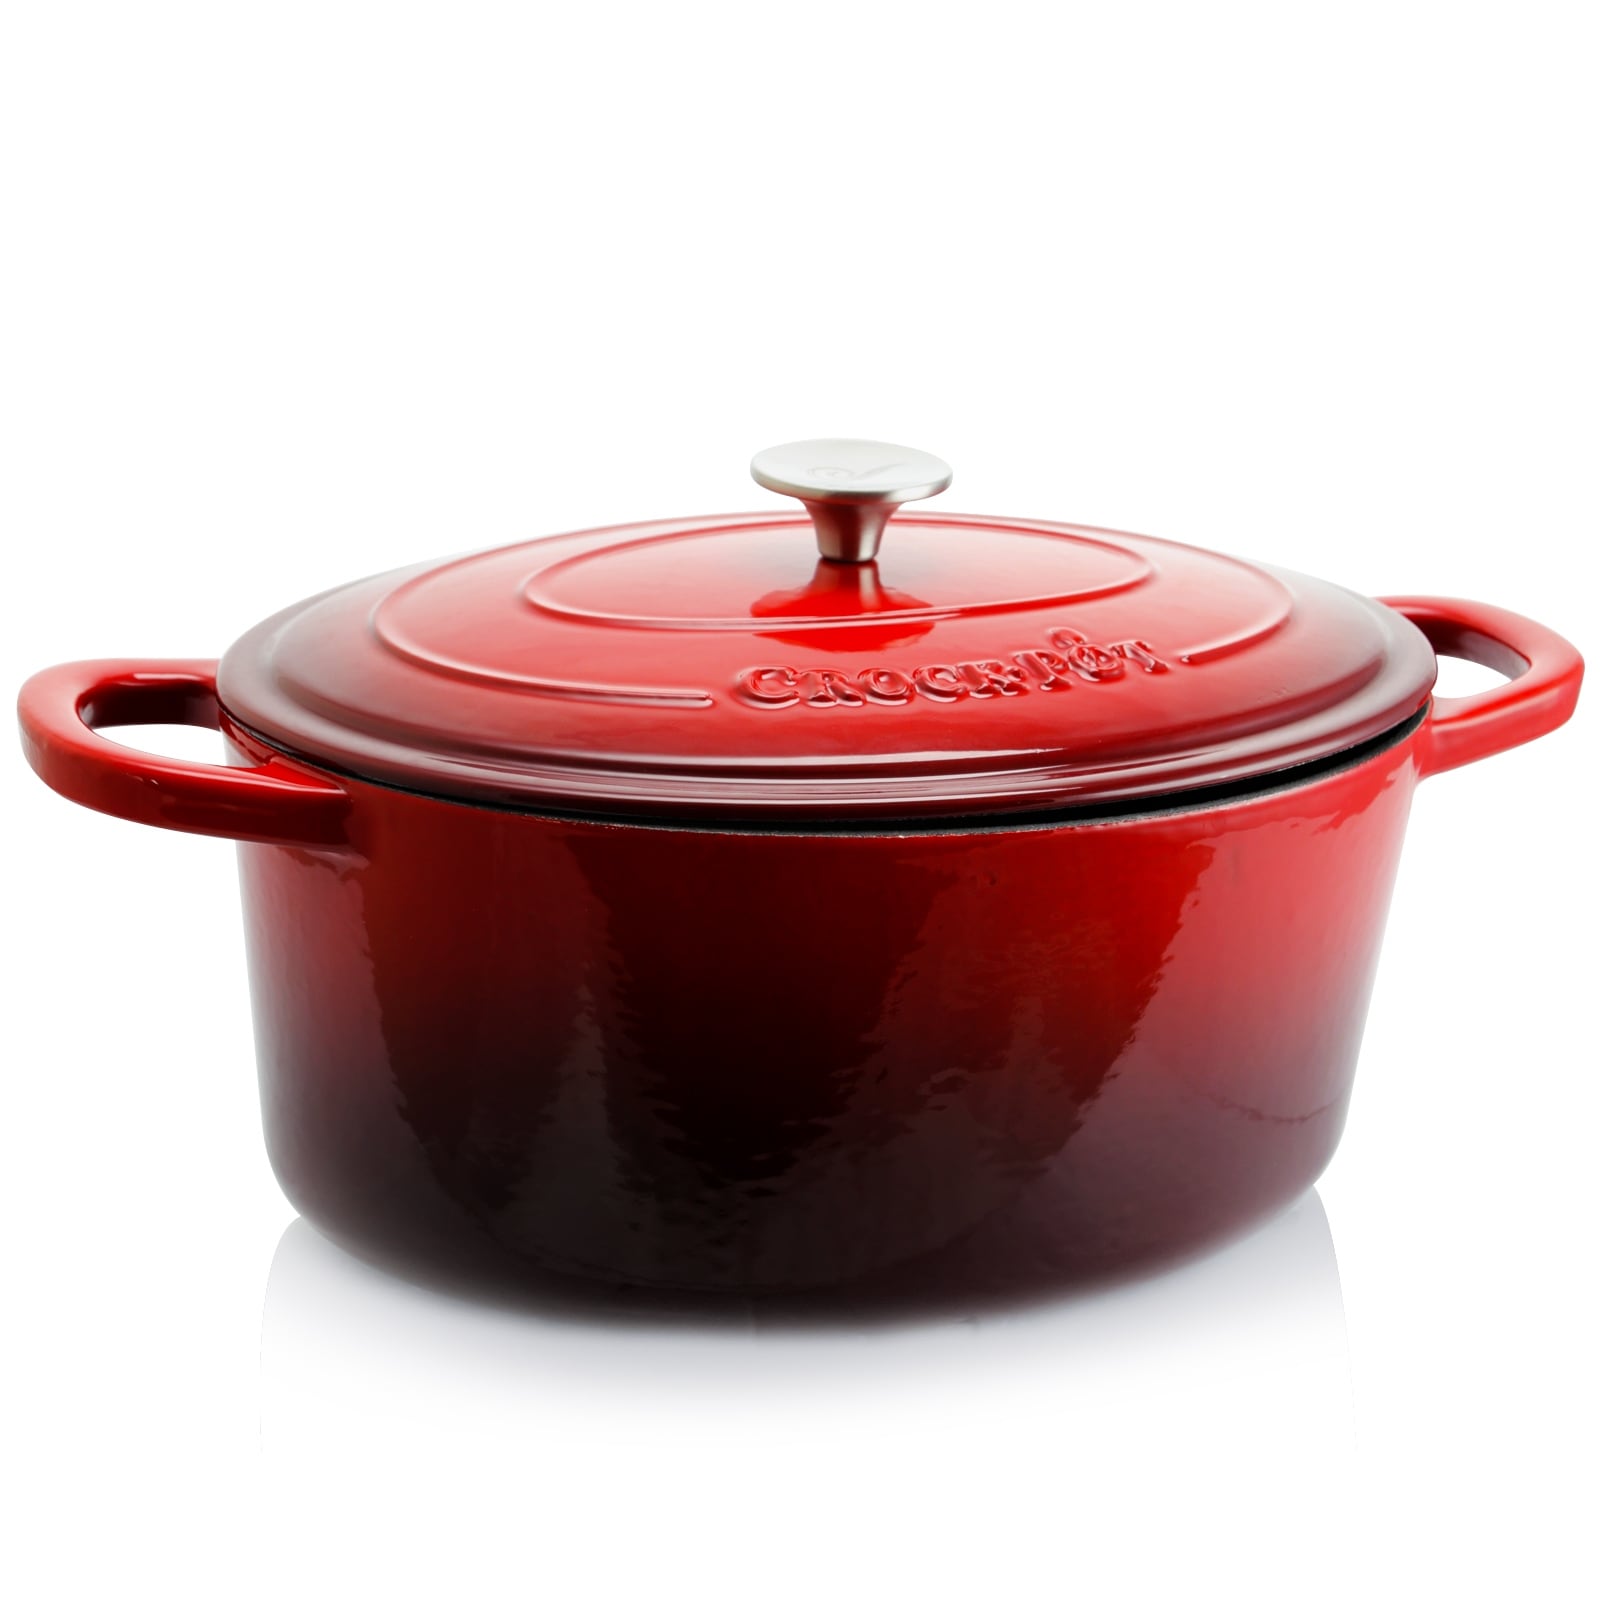 https://ak1.ostkcdn.com/images/products/is/images/direct/d3370ff191135738300d9649e23961d954420105/Crock-Pot-Artisan-7-Quart-Oval-Enameled-Cast-Iron-Dutch-Oven-in-Scarlet-Red.jpg